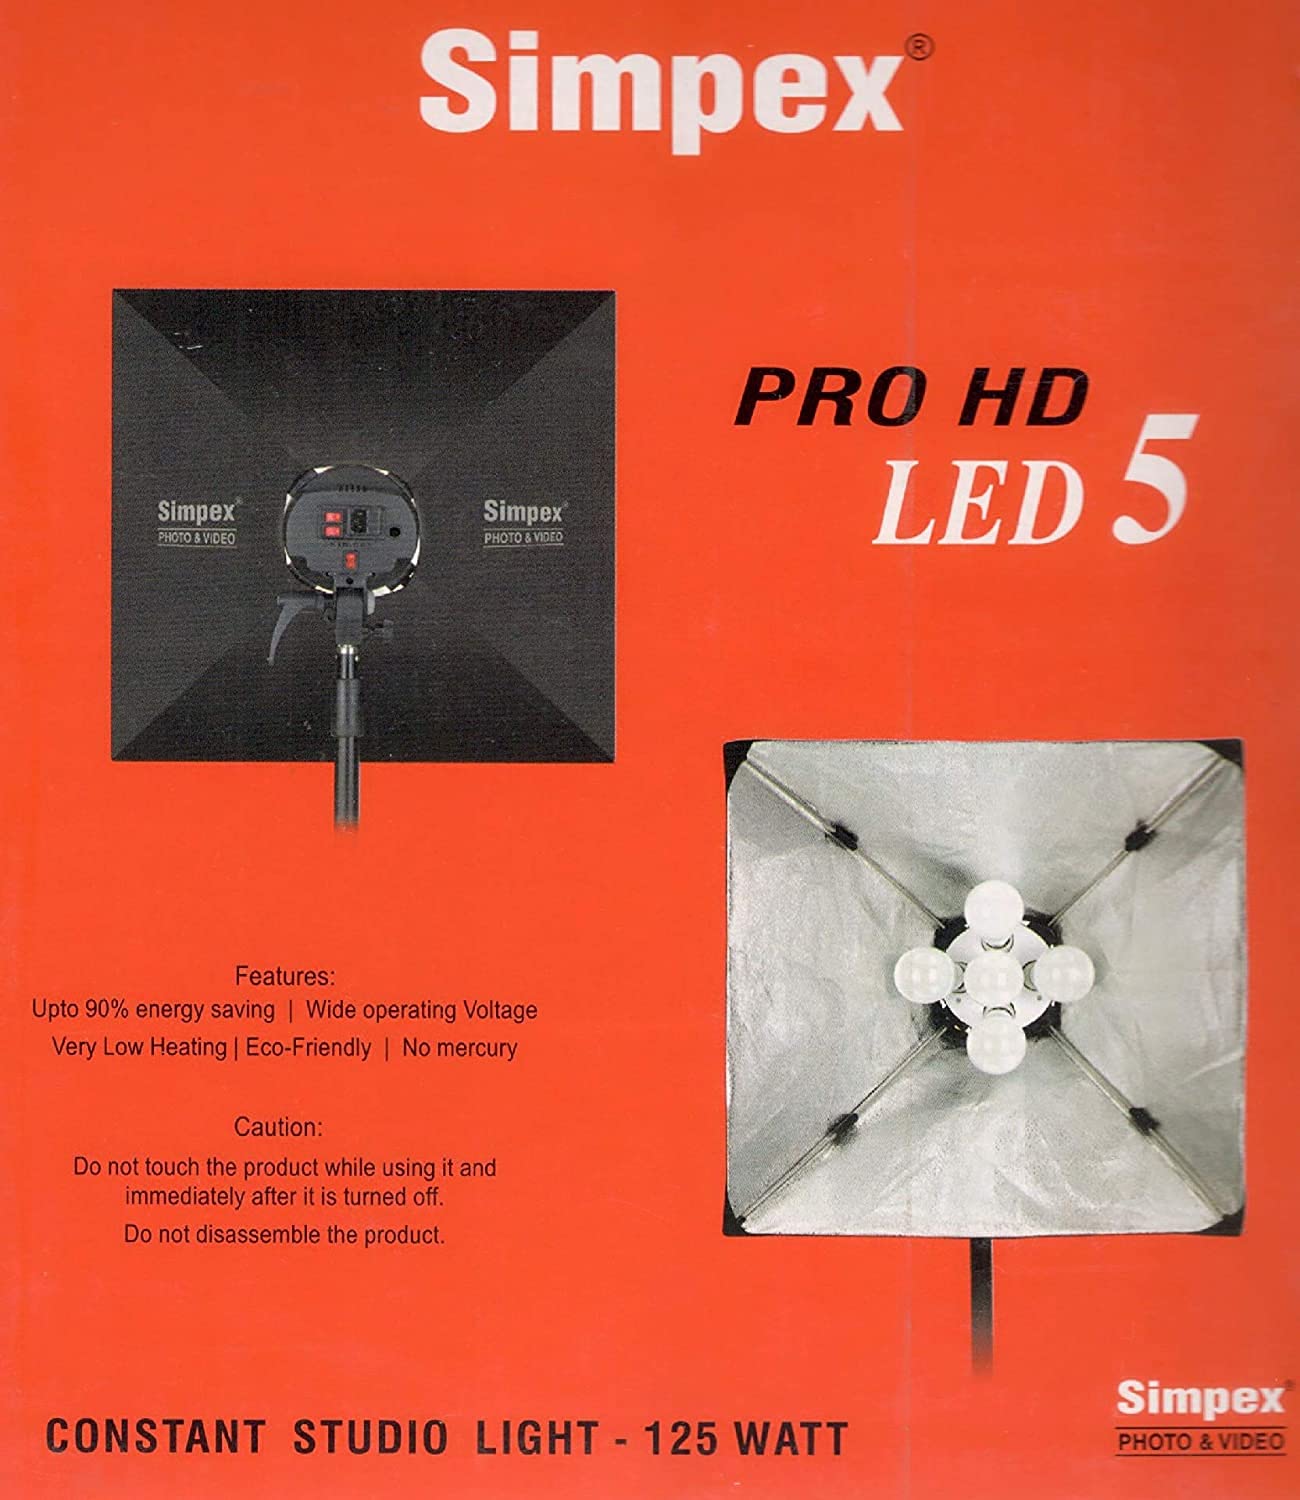 Simpex SLB 100 Bi Bowens Mount LED Video Light, 100w Continuous Bi Colour led  Light with Reflector Suitable for All Kinds of Video Shoot (SLB 100 bi) :  Amazon.in: Electronics